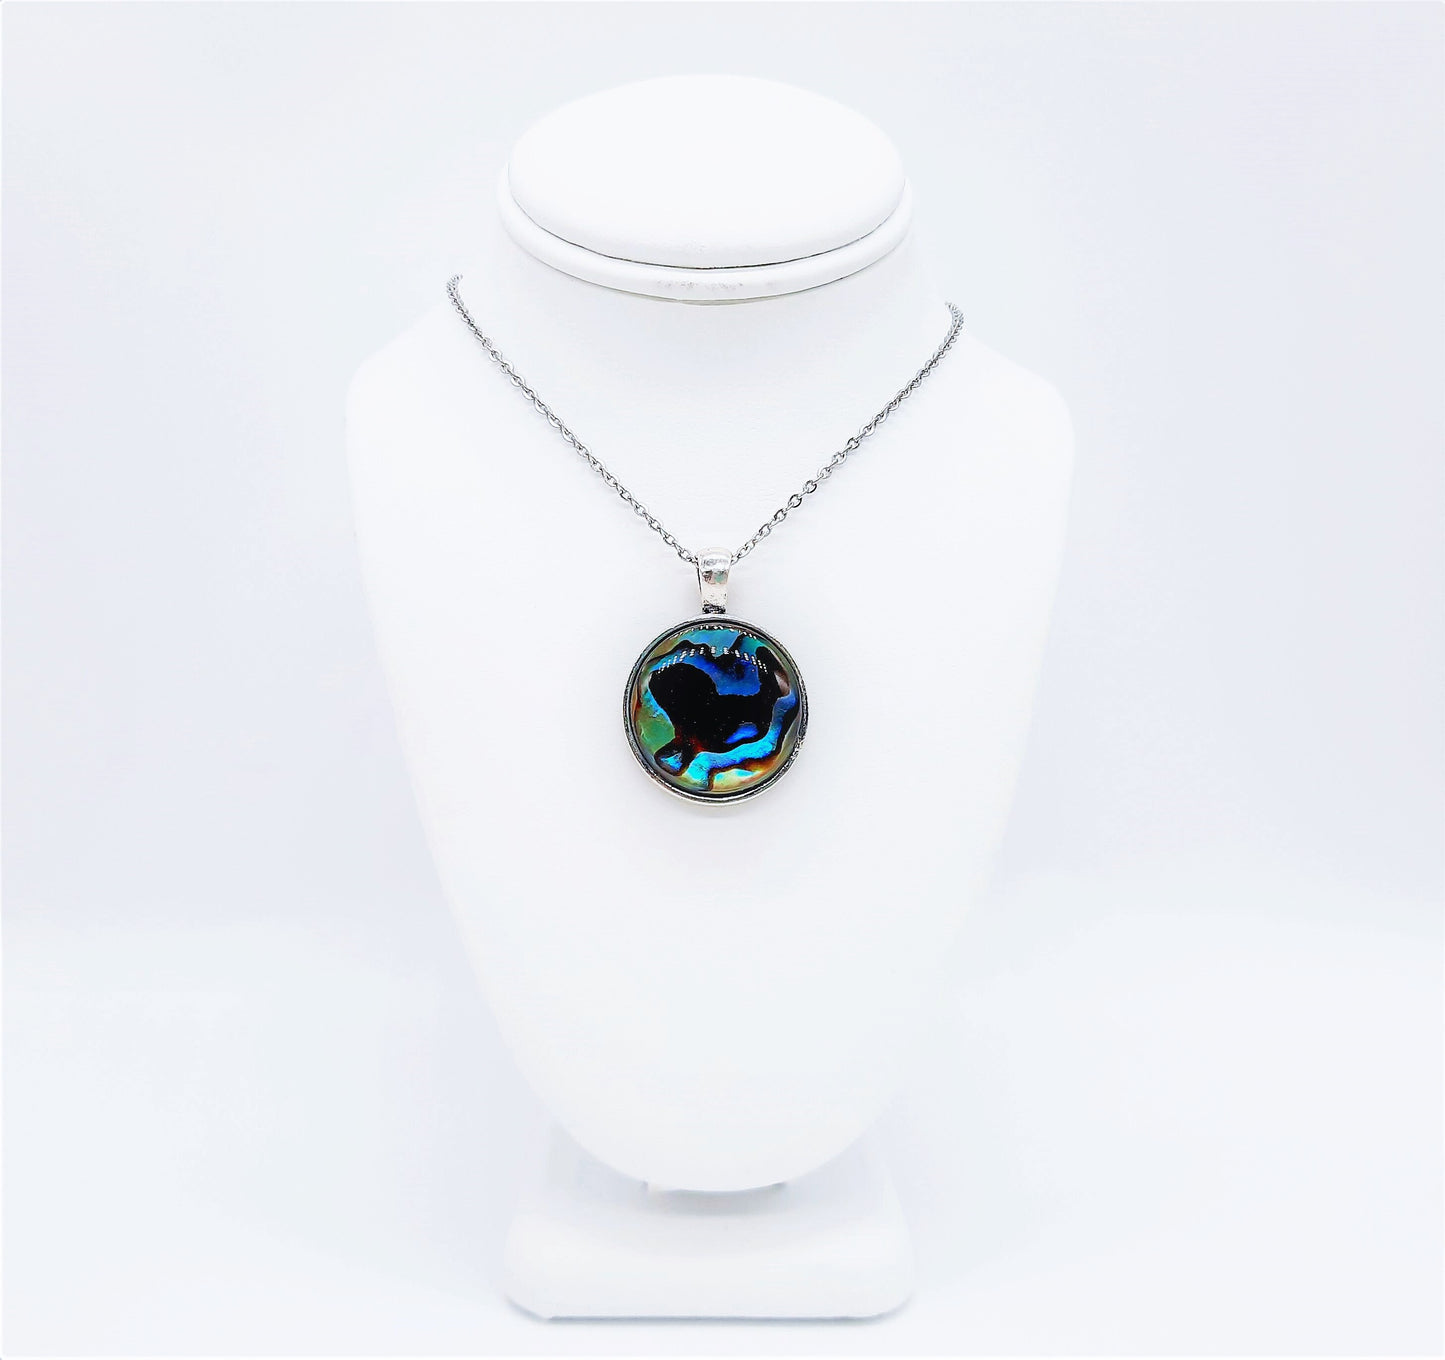 Natural Abalone / Paua Seashell Pendant Necklace - Stainless Steel - Hypoallergenic - Dome Covered with Holographic Powder Infused Resin